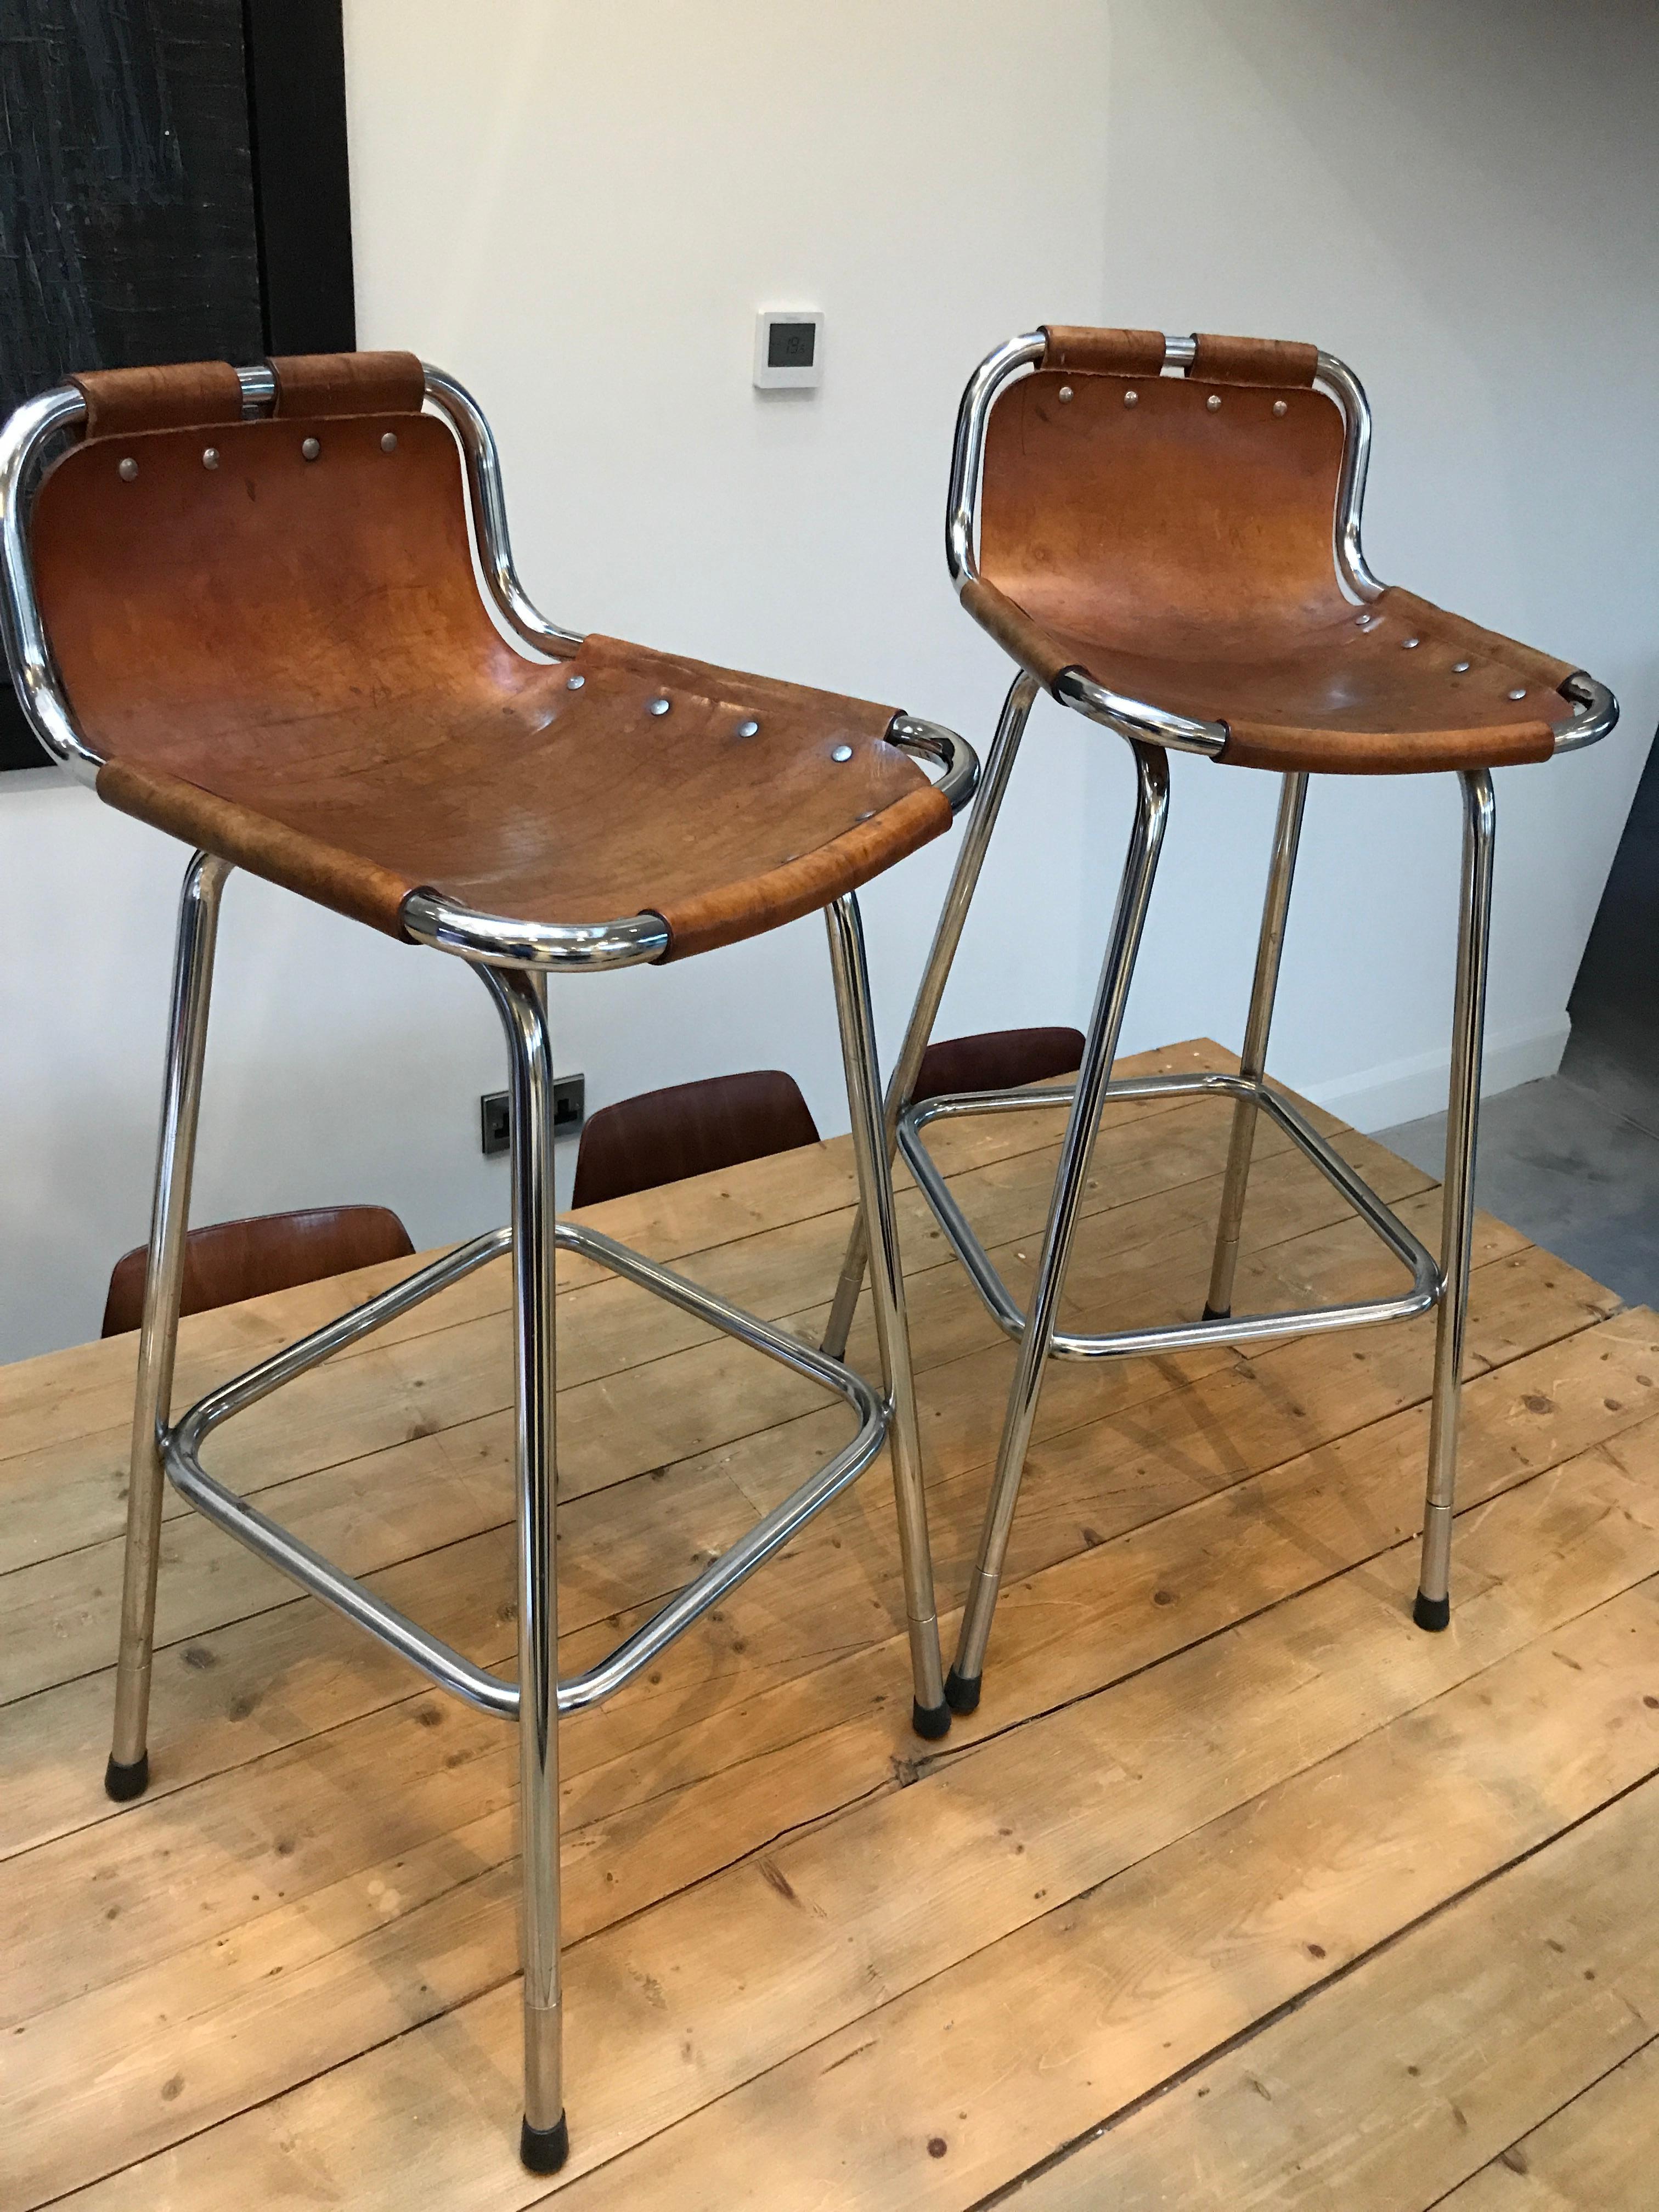 20th Century Two High Bar Stools Selected by Charlotte Perriand for the Les Arcs Ski Resort